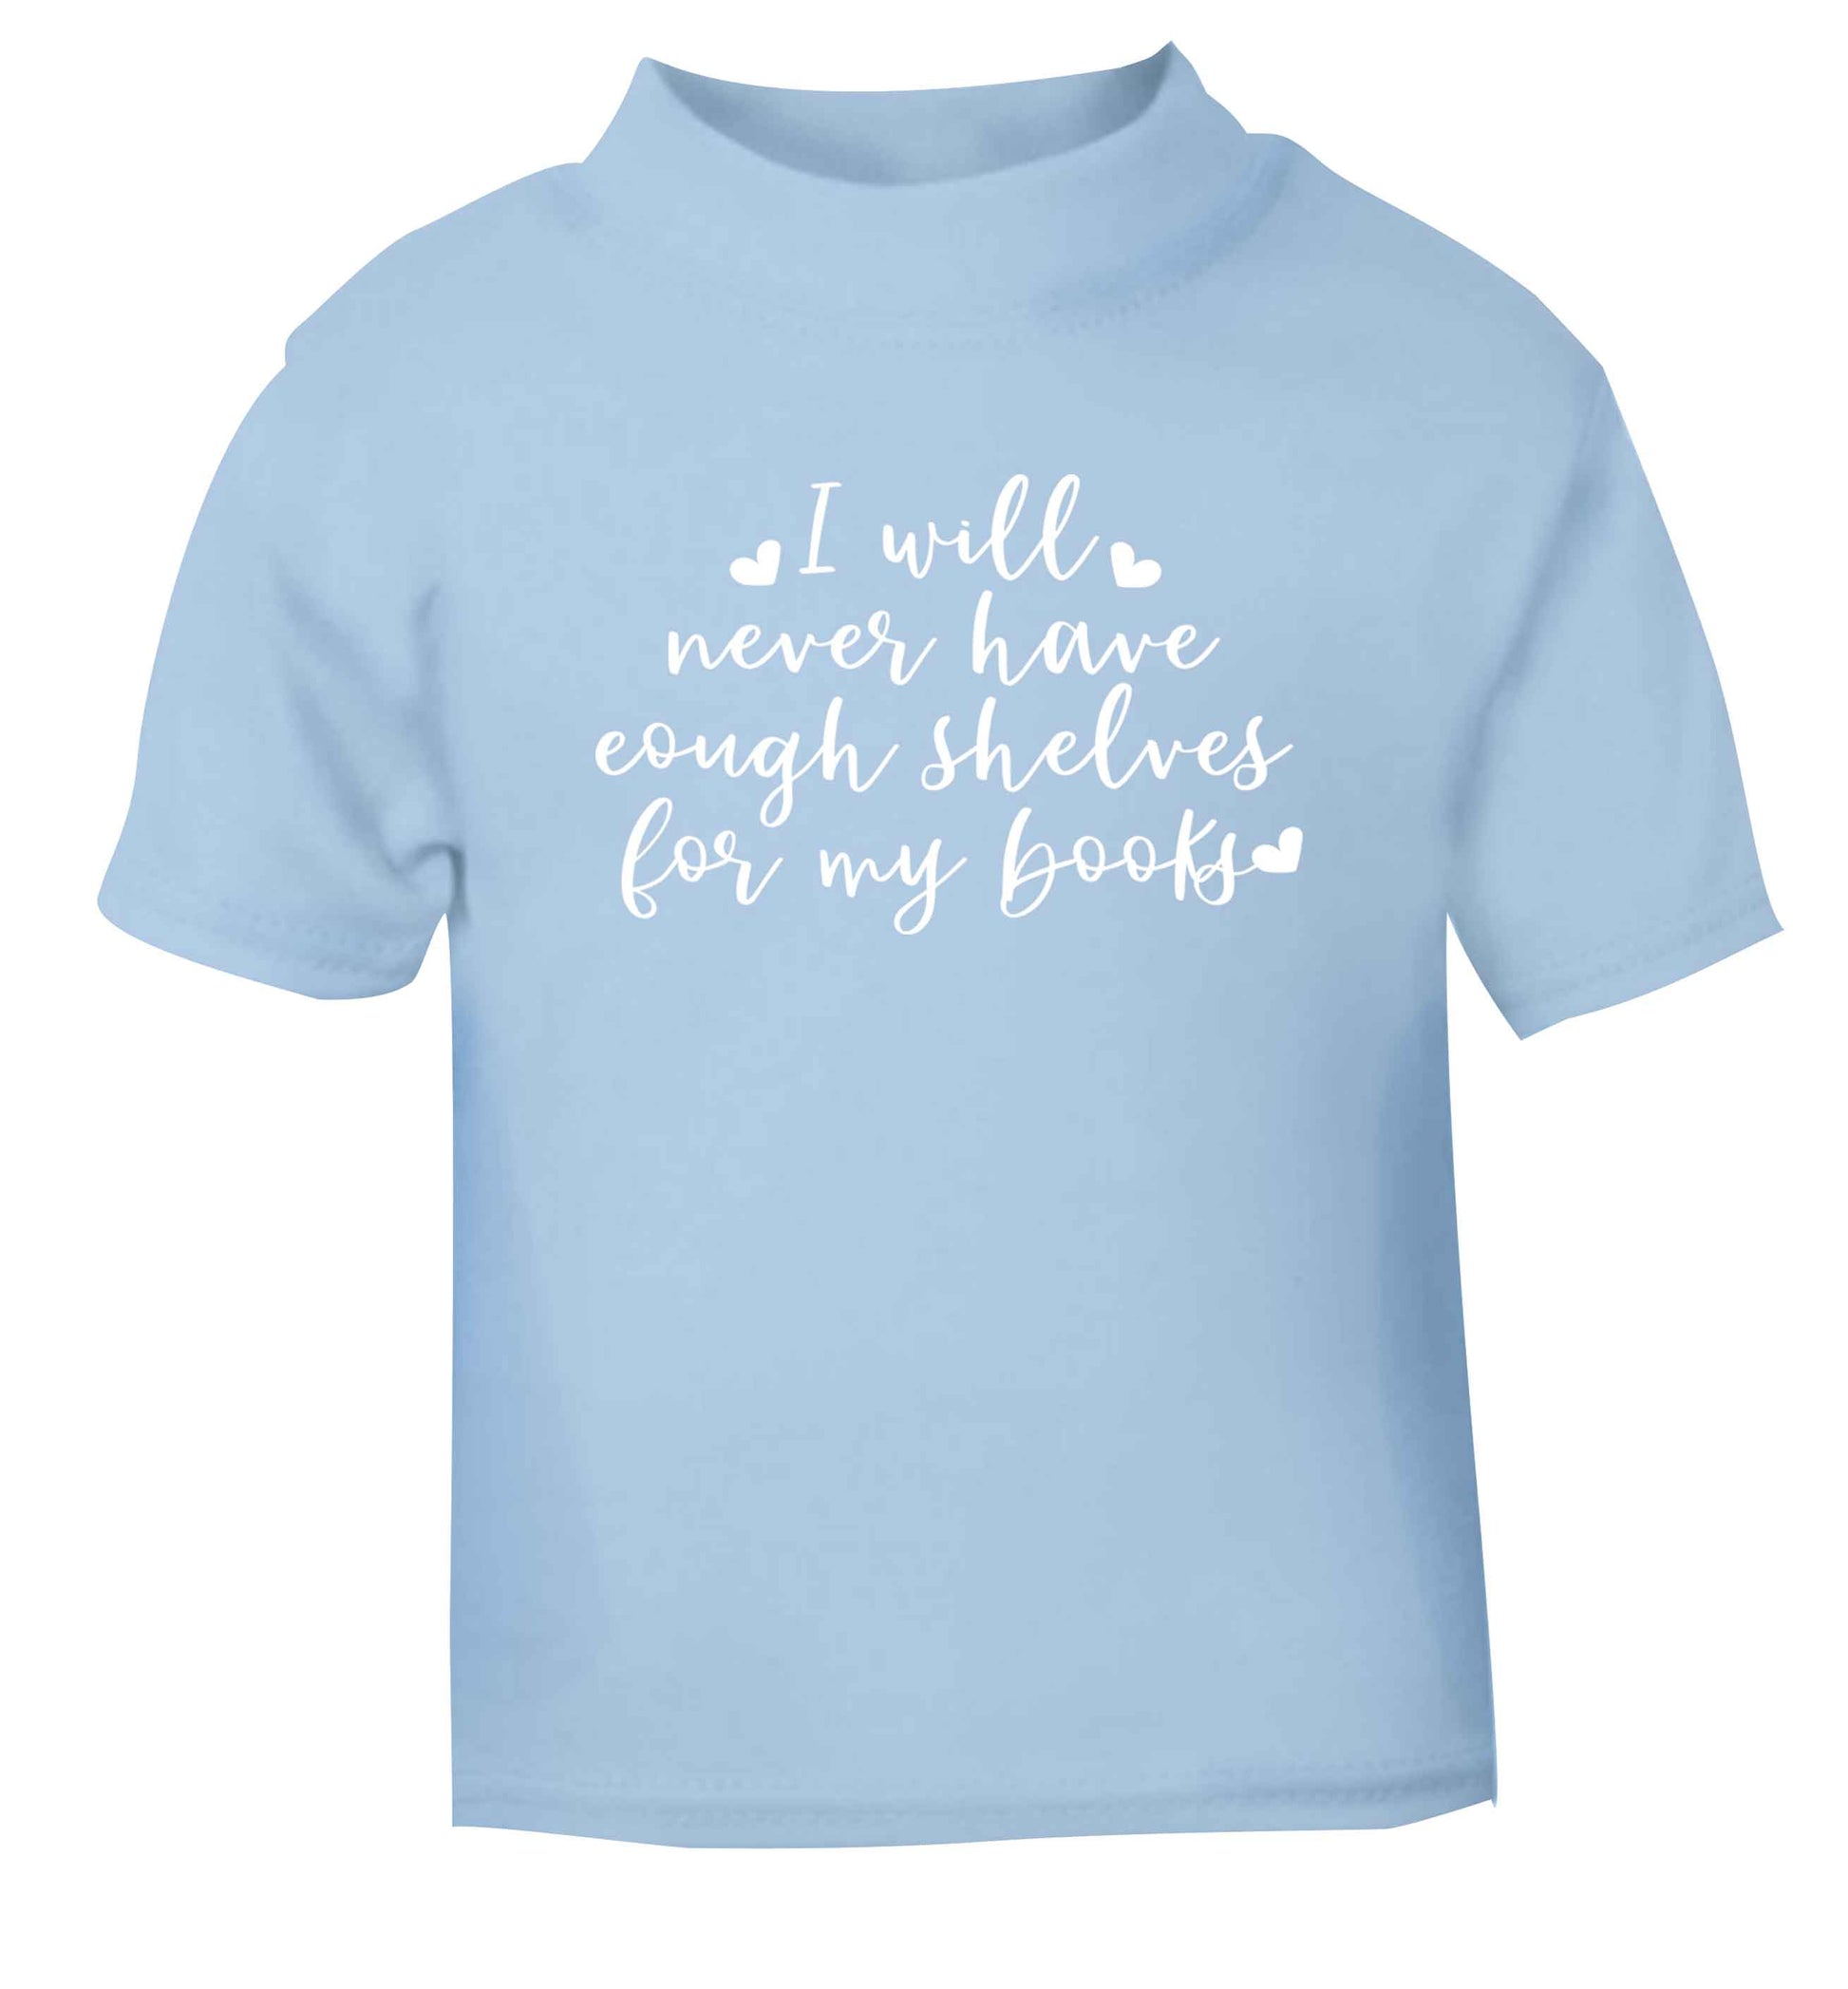 I will never have enough shelves for my books light blue Baby Toddler Tshirt 2 Years